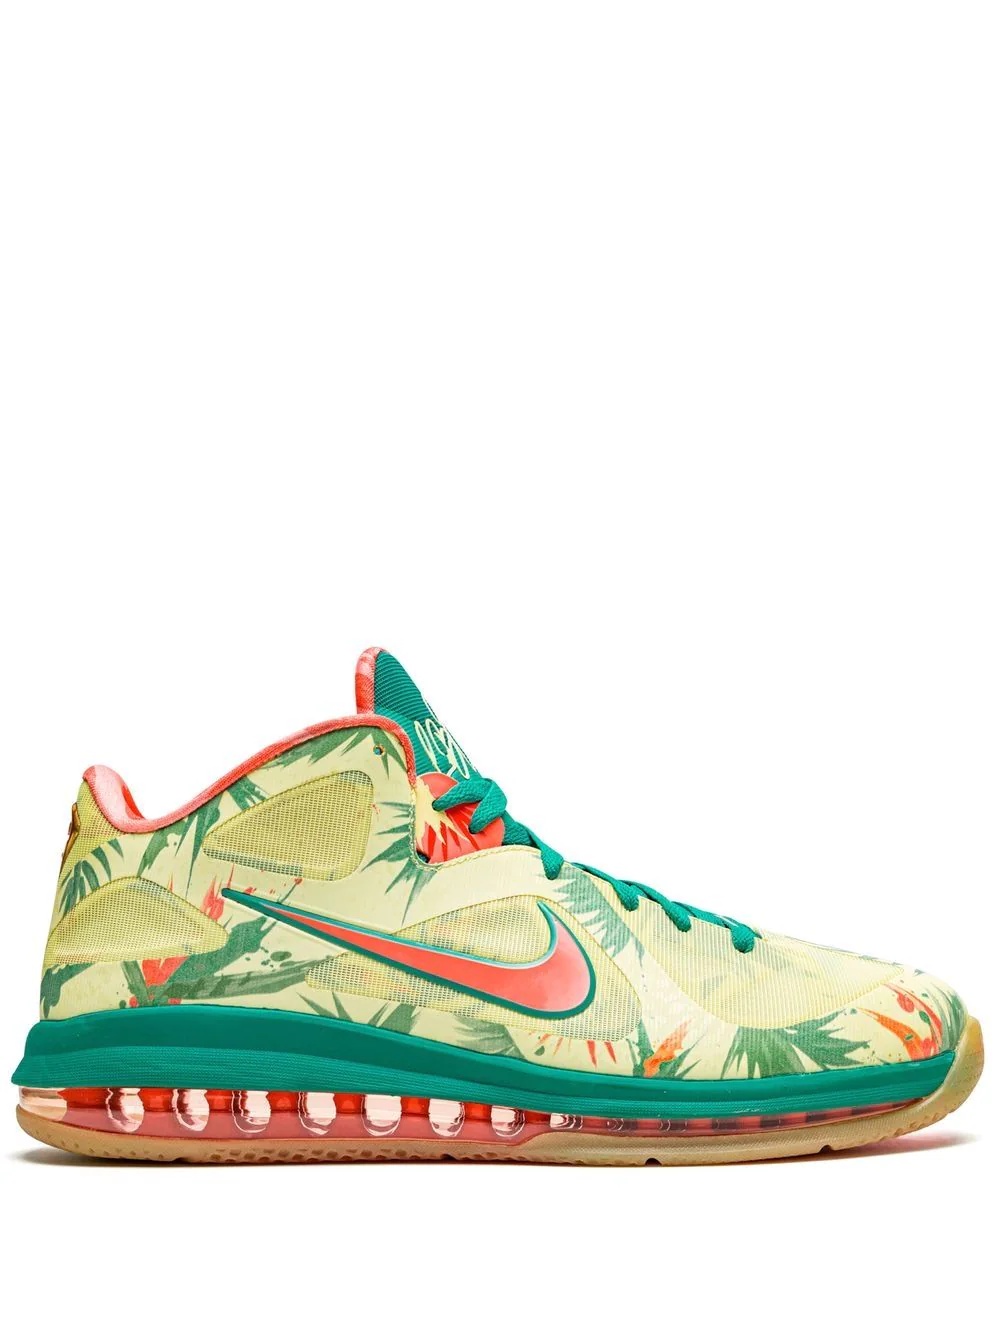 LeBron 9 Low "Arnold Palmer" sneakers - 1